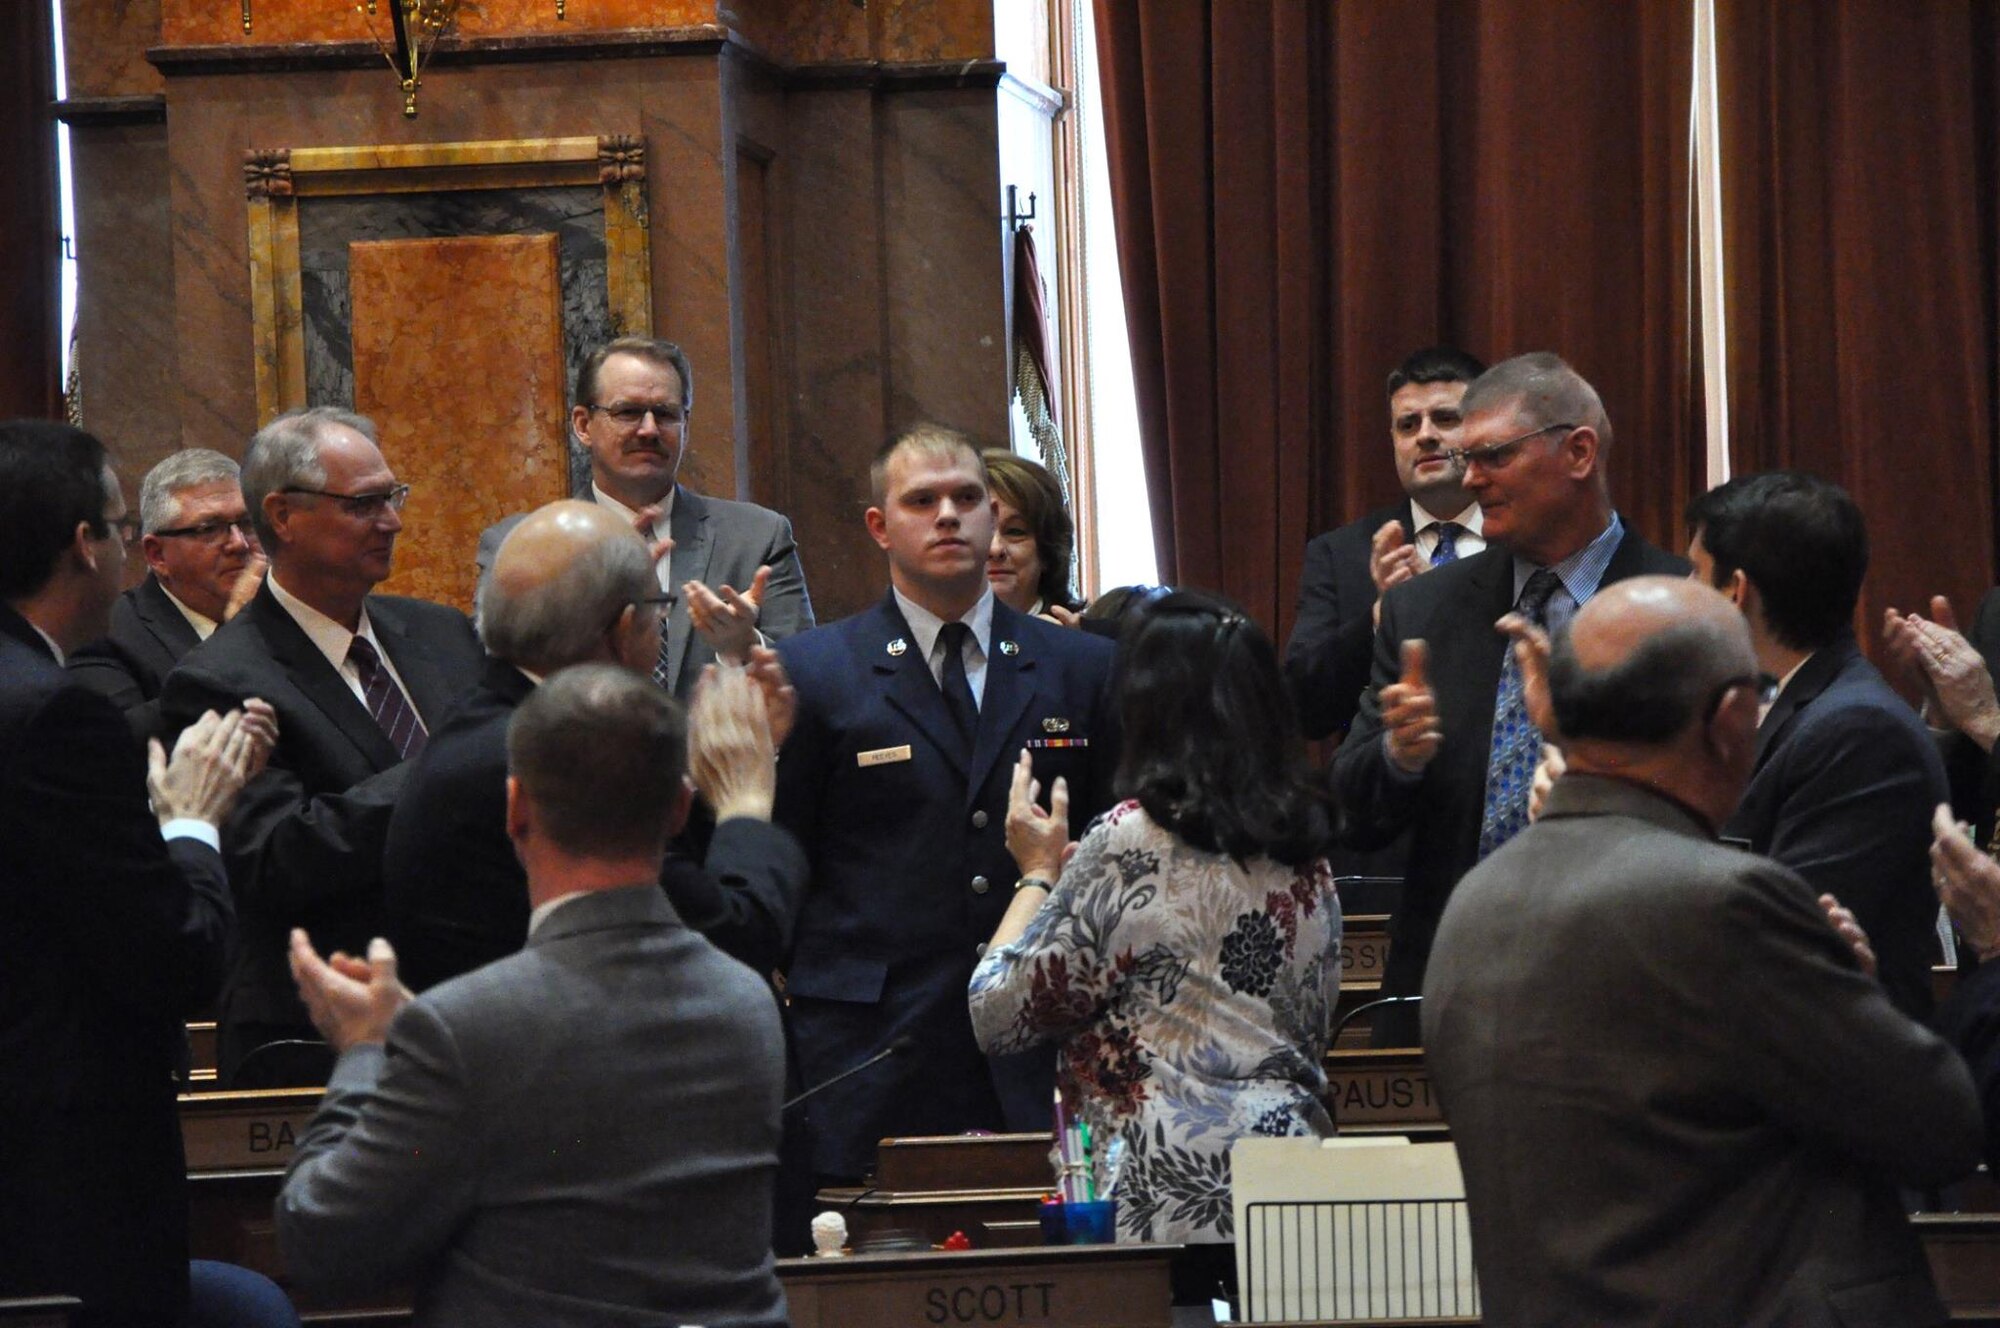 Airman 1st Class Josiah Reeves, cyber transport with the 132d Intelligence Support Squadron (ISS), is recognized by multiple representatives during the Eighty-Eighth General Assembly at the Iowa State Capitol on January 17th, 2019. Reeves was recognized for joining the Air National Guard to take advantage of the Science, Technology, Engineering, and Math (STEM) opportunities and utilizing the tuition assistance. (Iowa National Guard photo by Lt. Col. Timothy Mills)